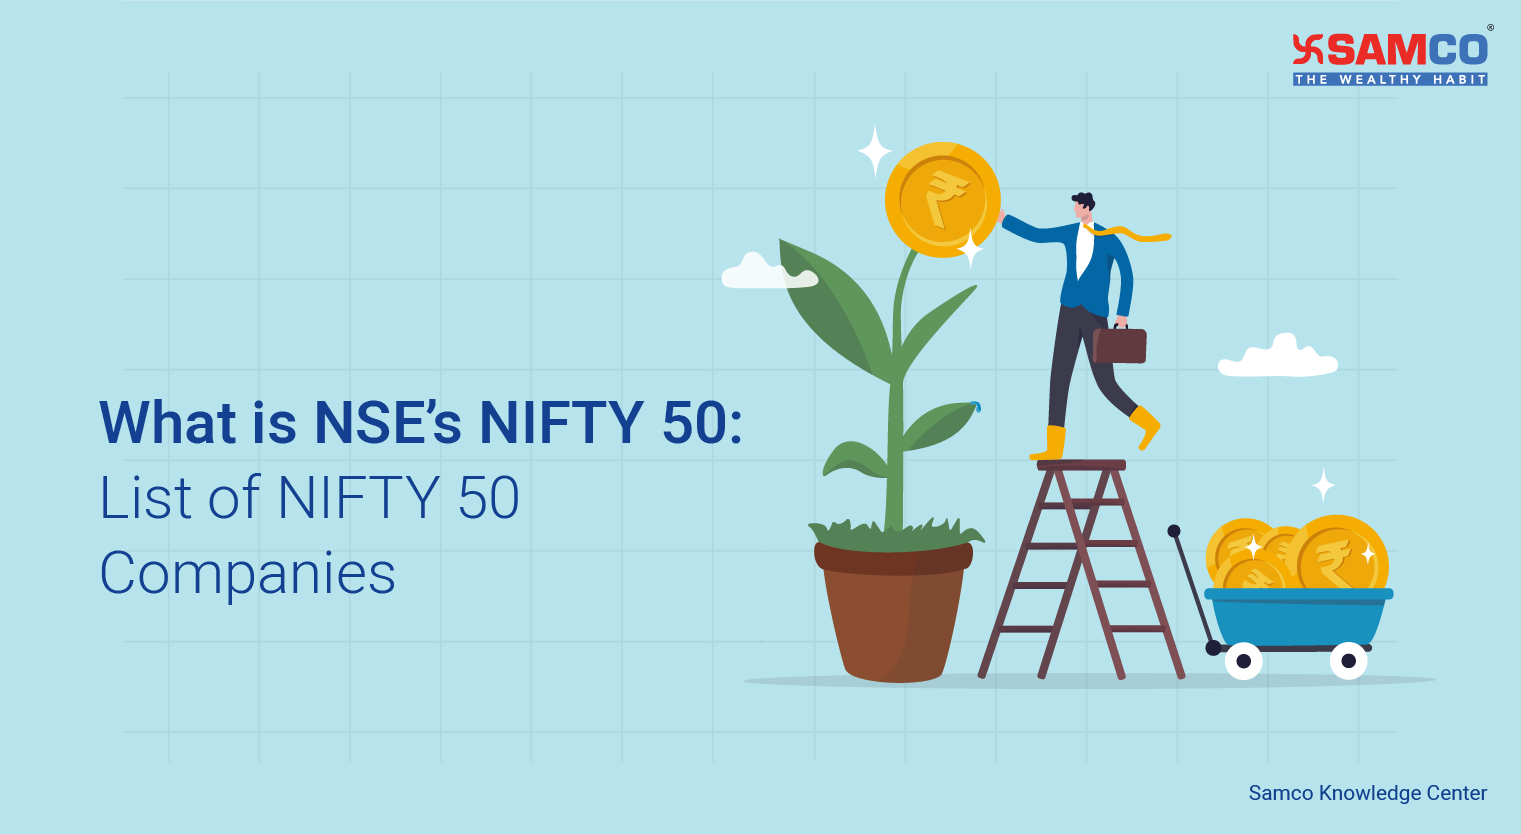 What is NSE’s NIFTY 50